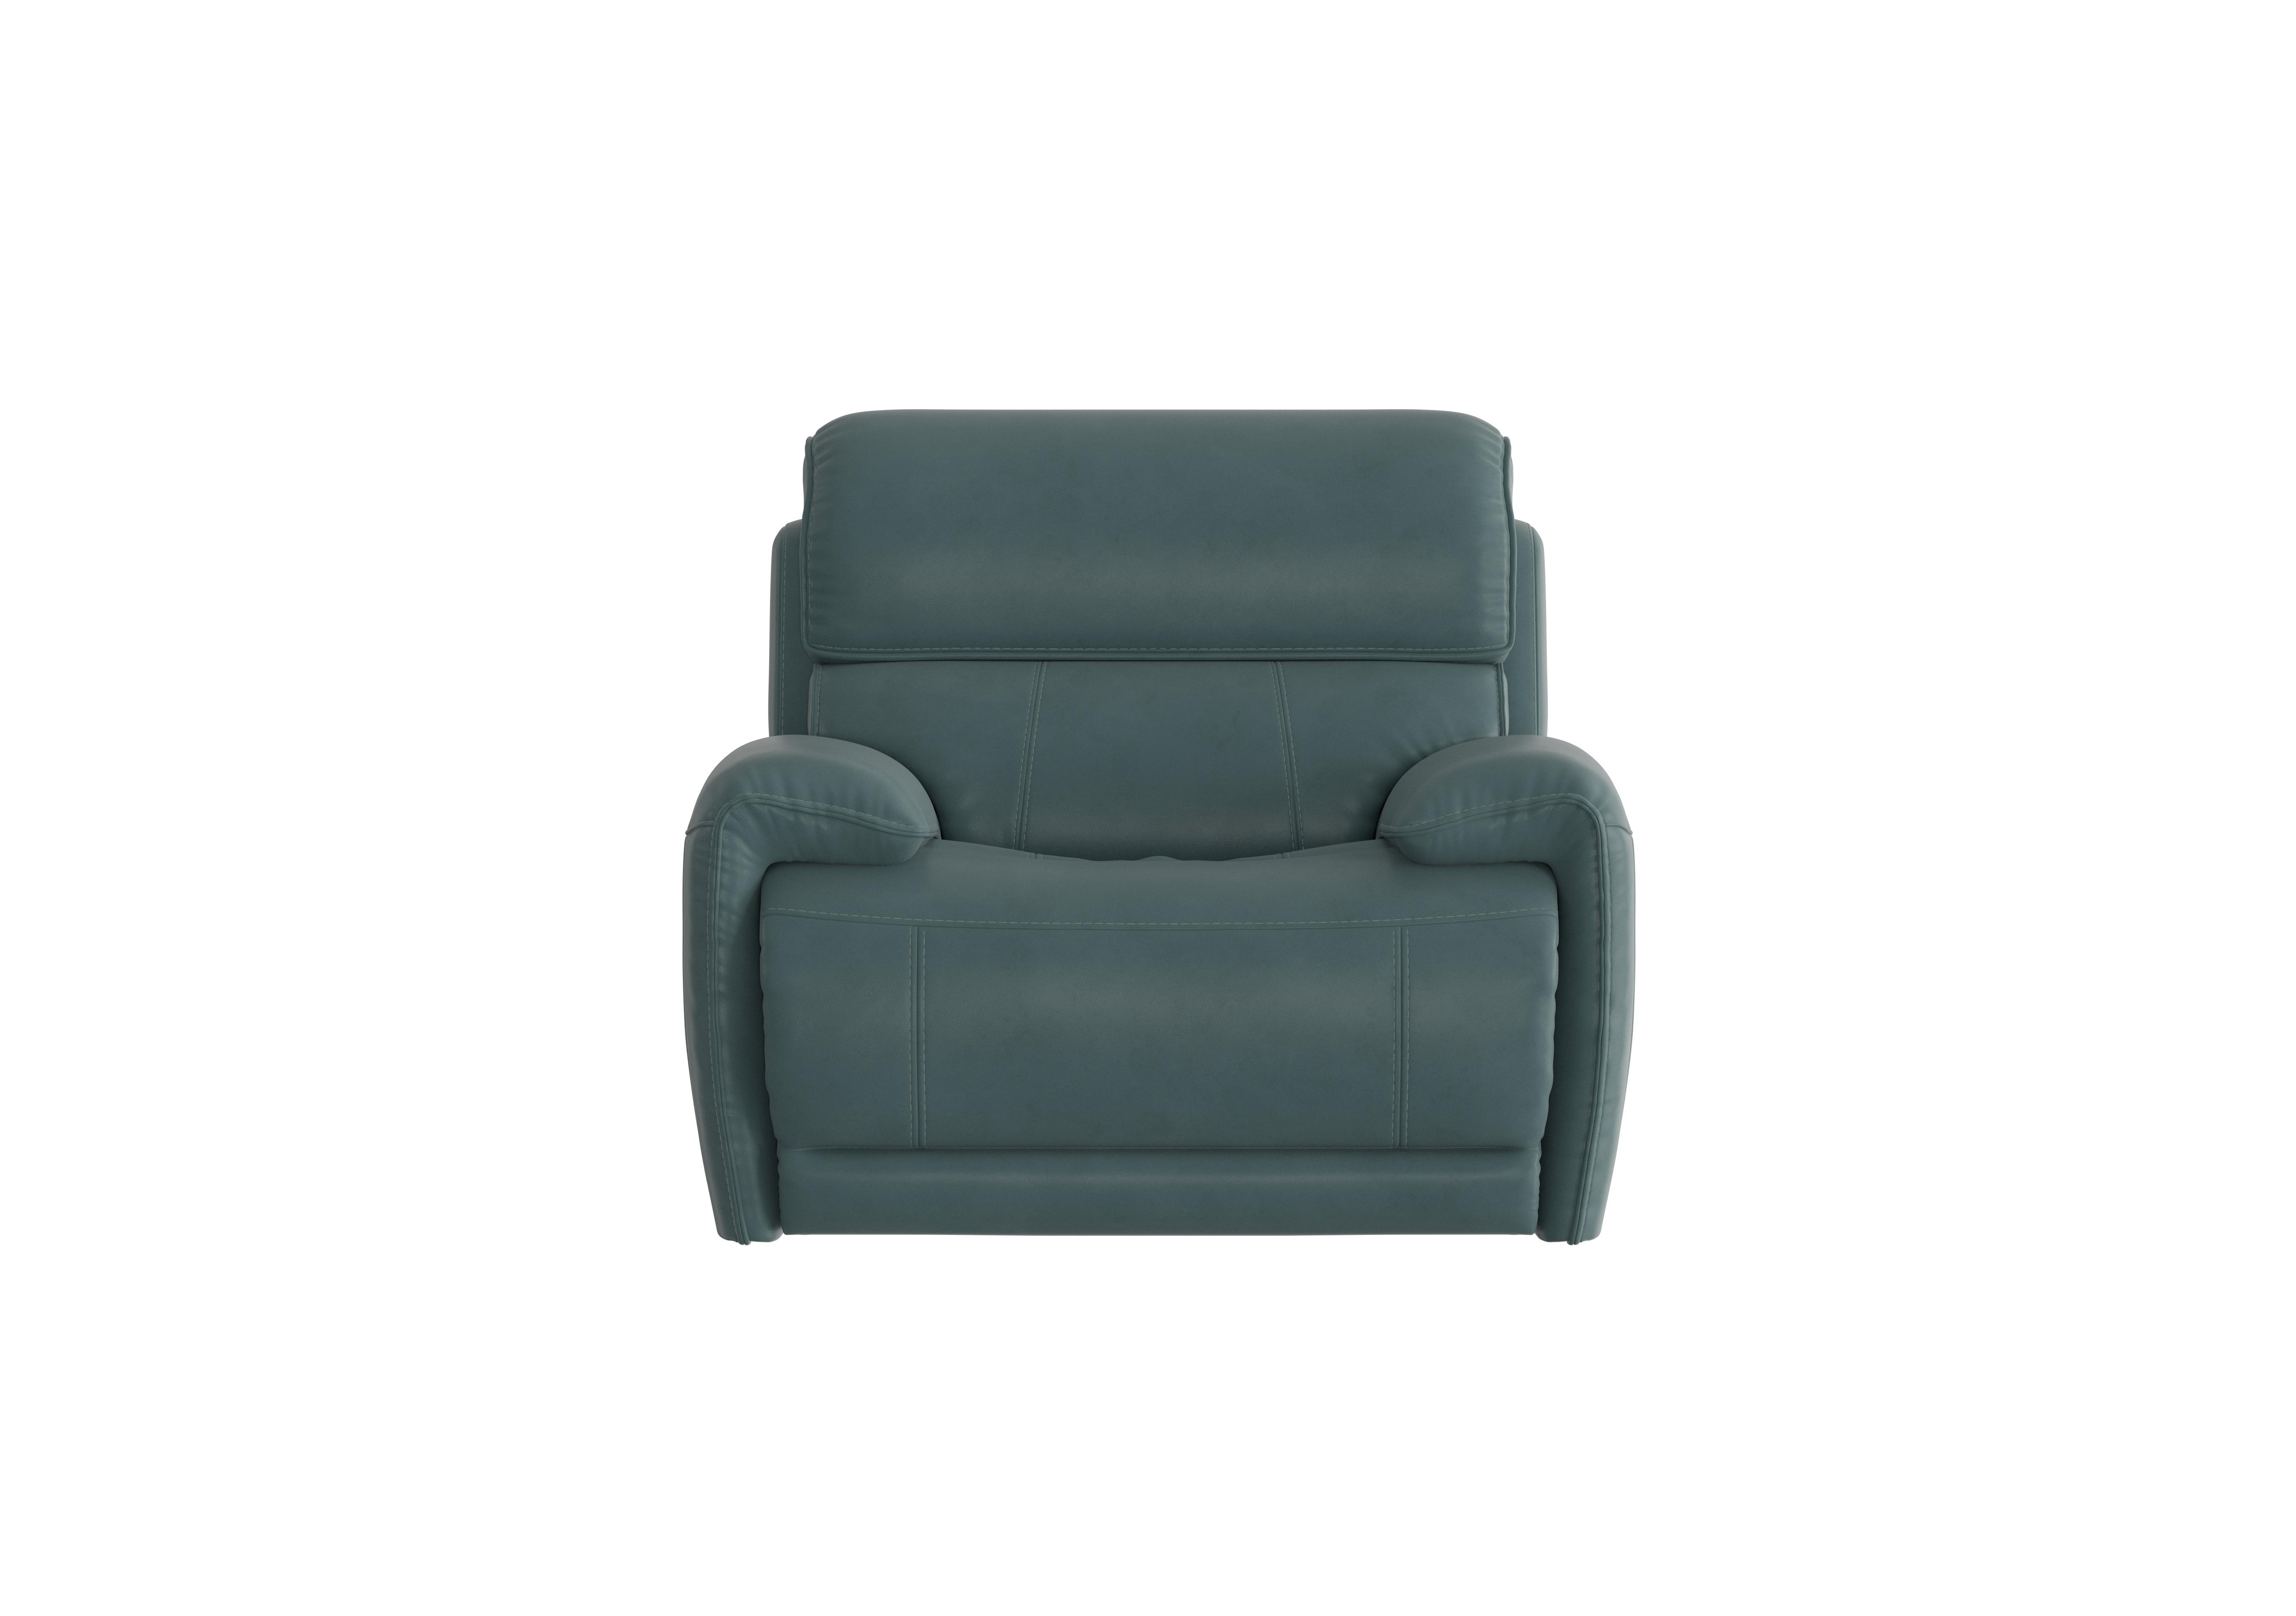 Link Leather Armchair in Bv-301e Lake Green on Furniture Village